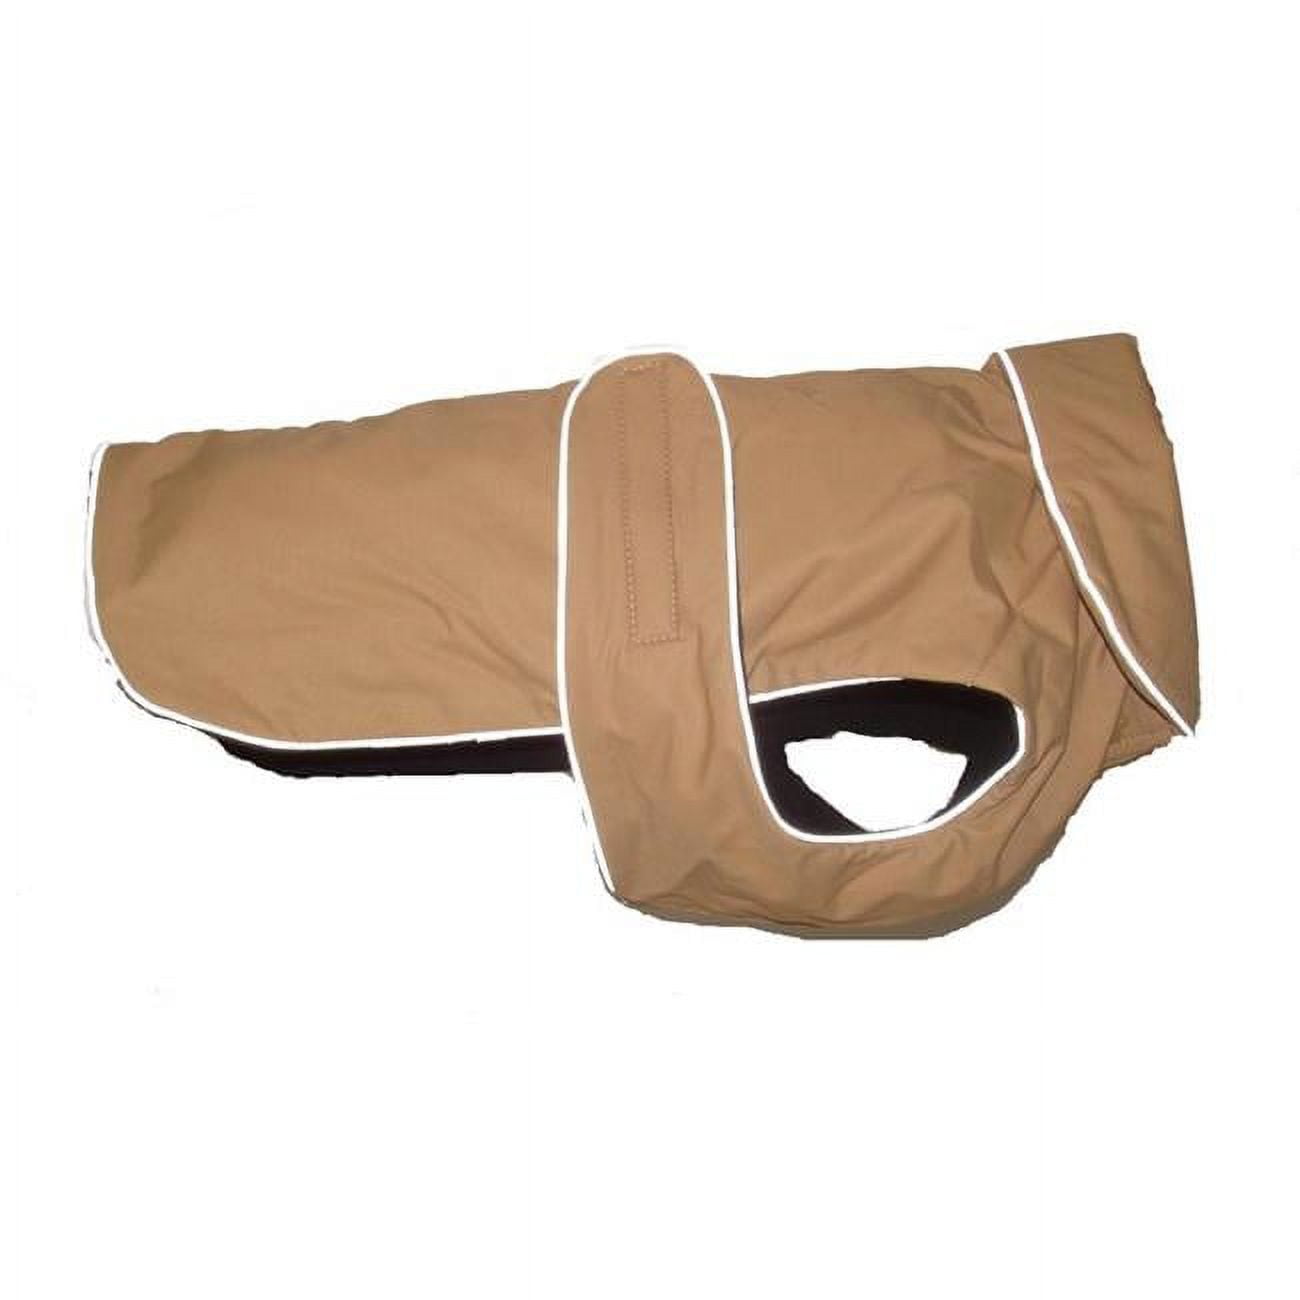 Picture of A Pets World 08192911-16 Weather Resistant Fleece Lined Dog Coat, Tan